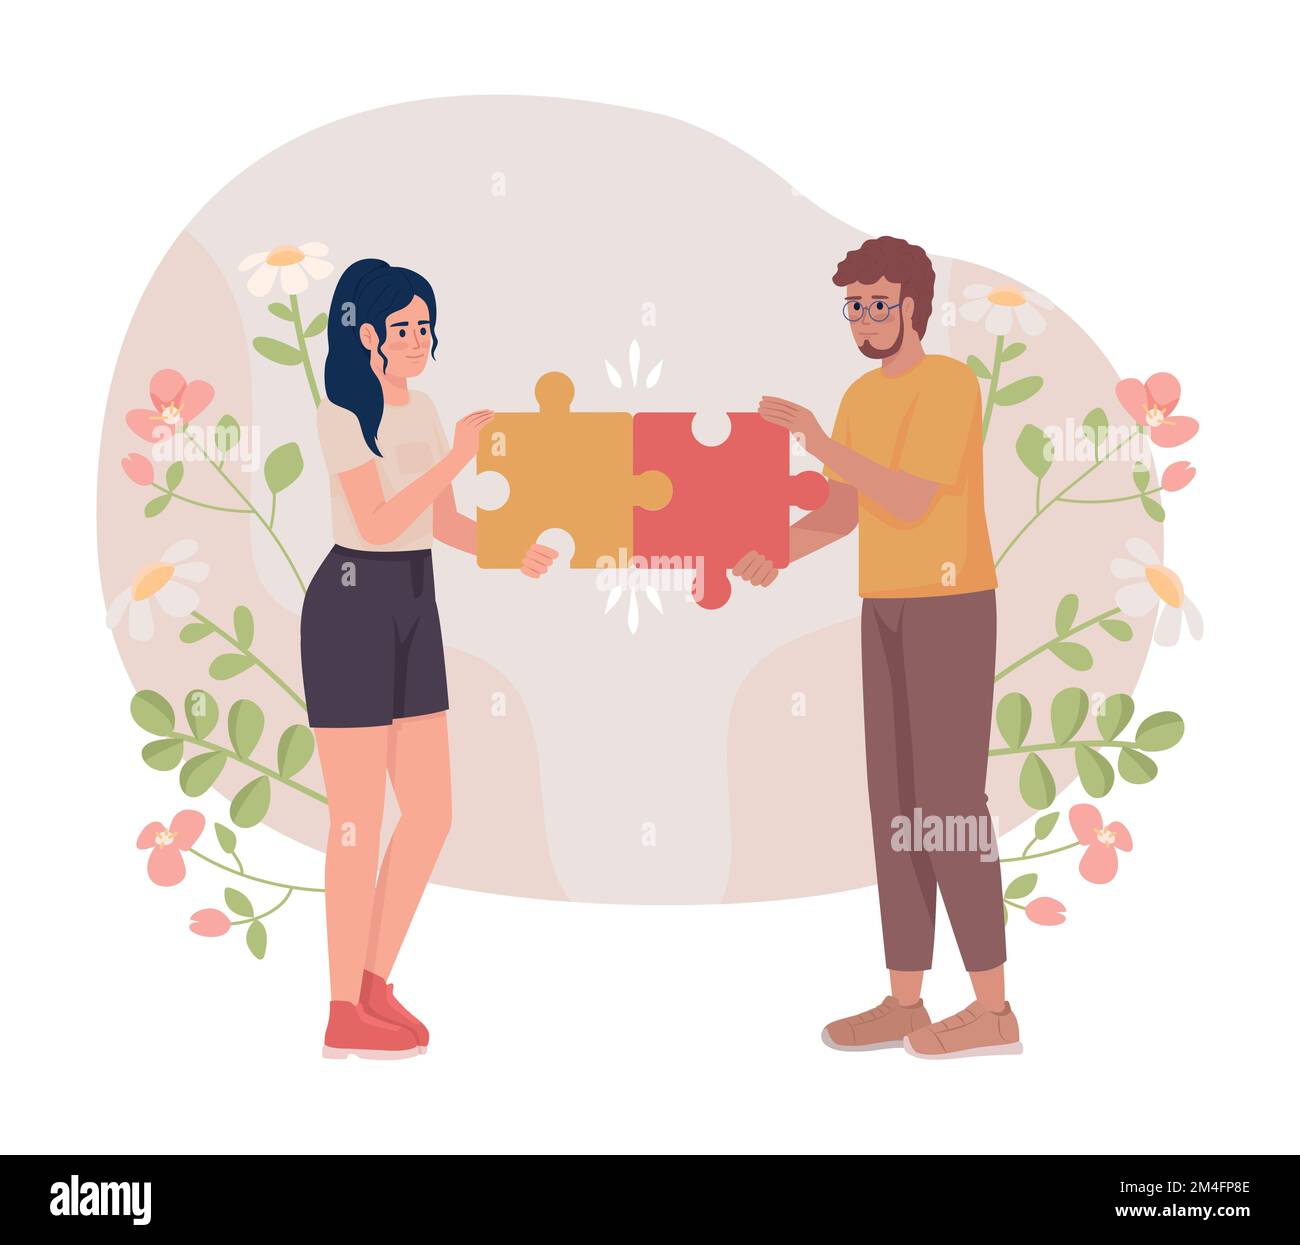 Couple fixing relationship flat concept vector illustration Stock Vector